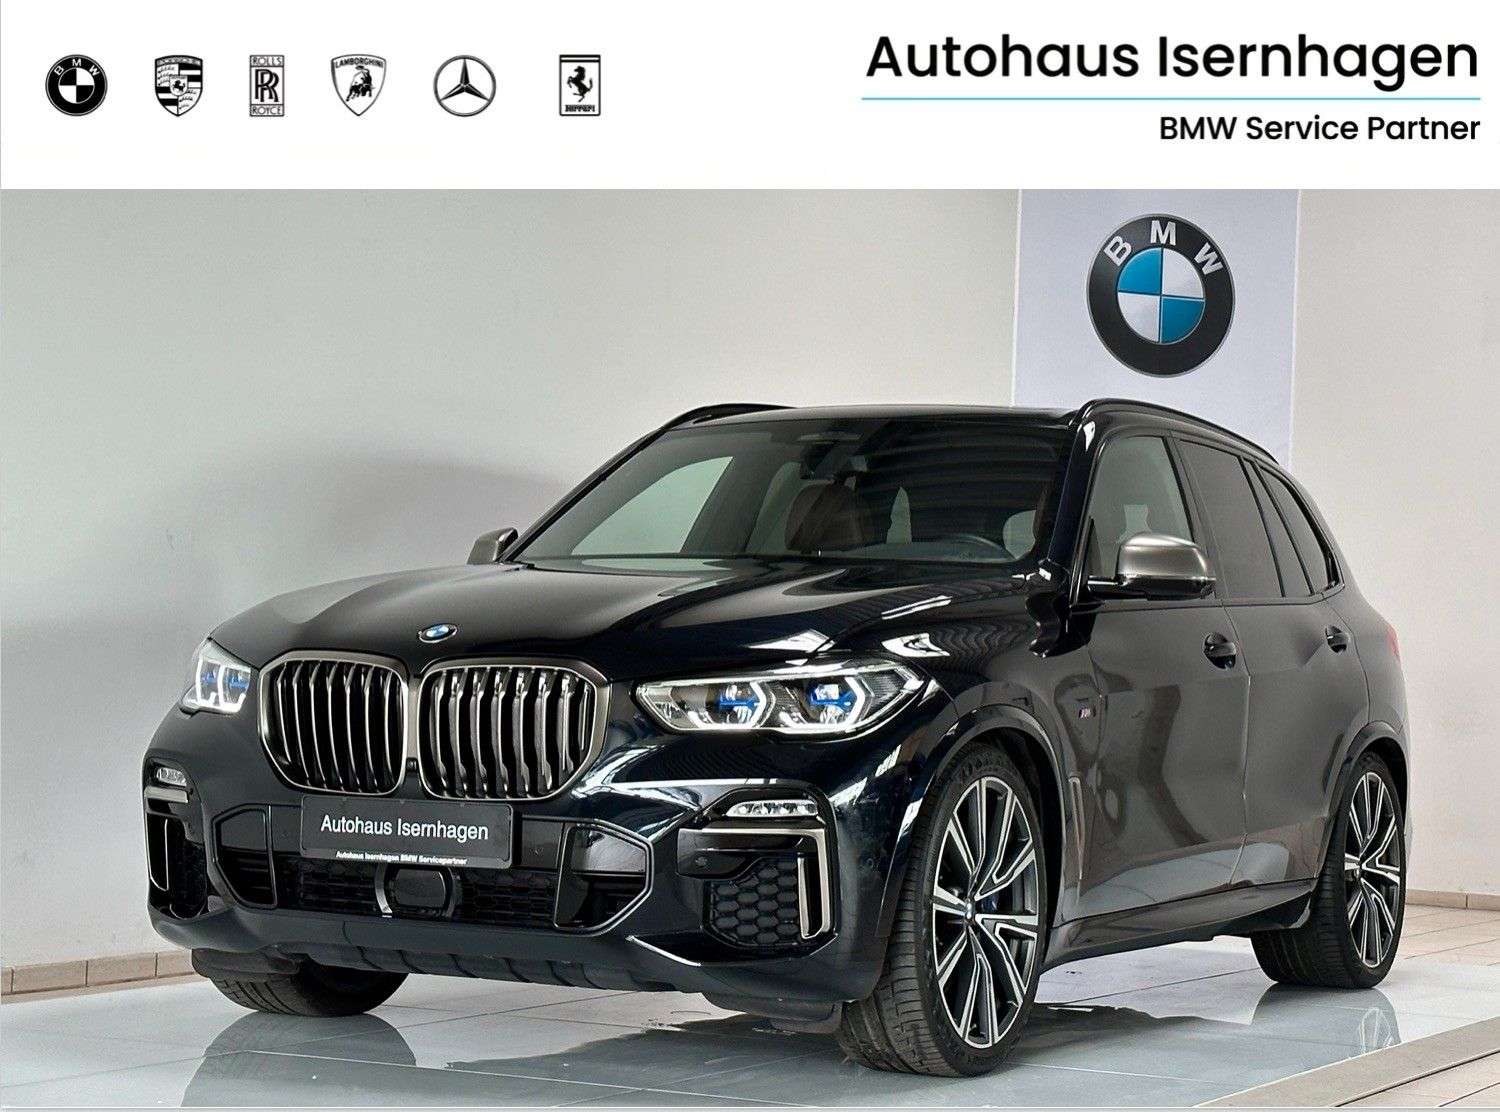 BMW X5 M Off-Road/Pick-up in Black used in Isernhagen for € 67,499.-